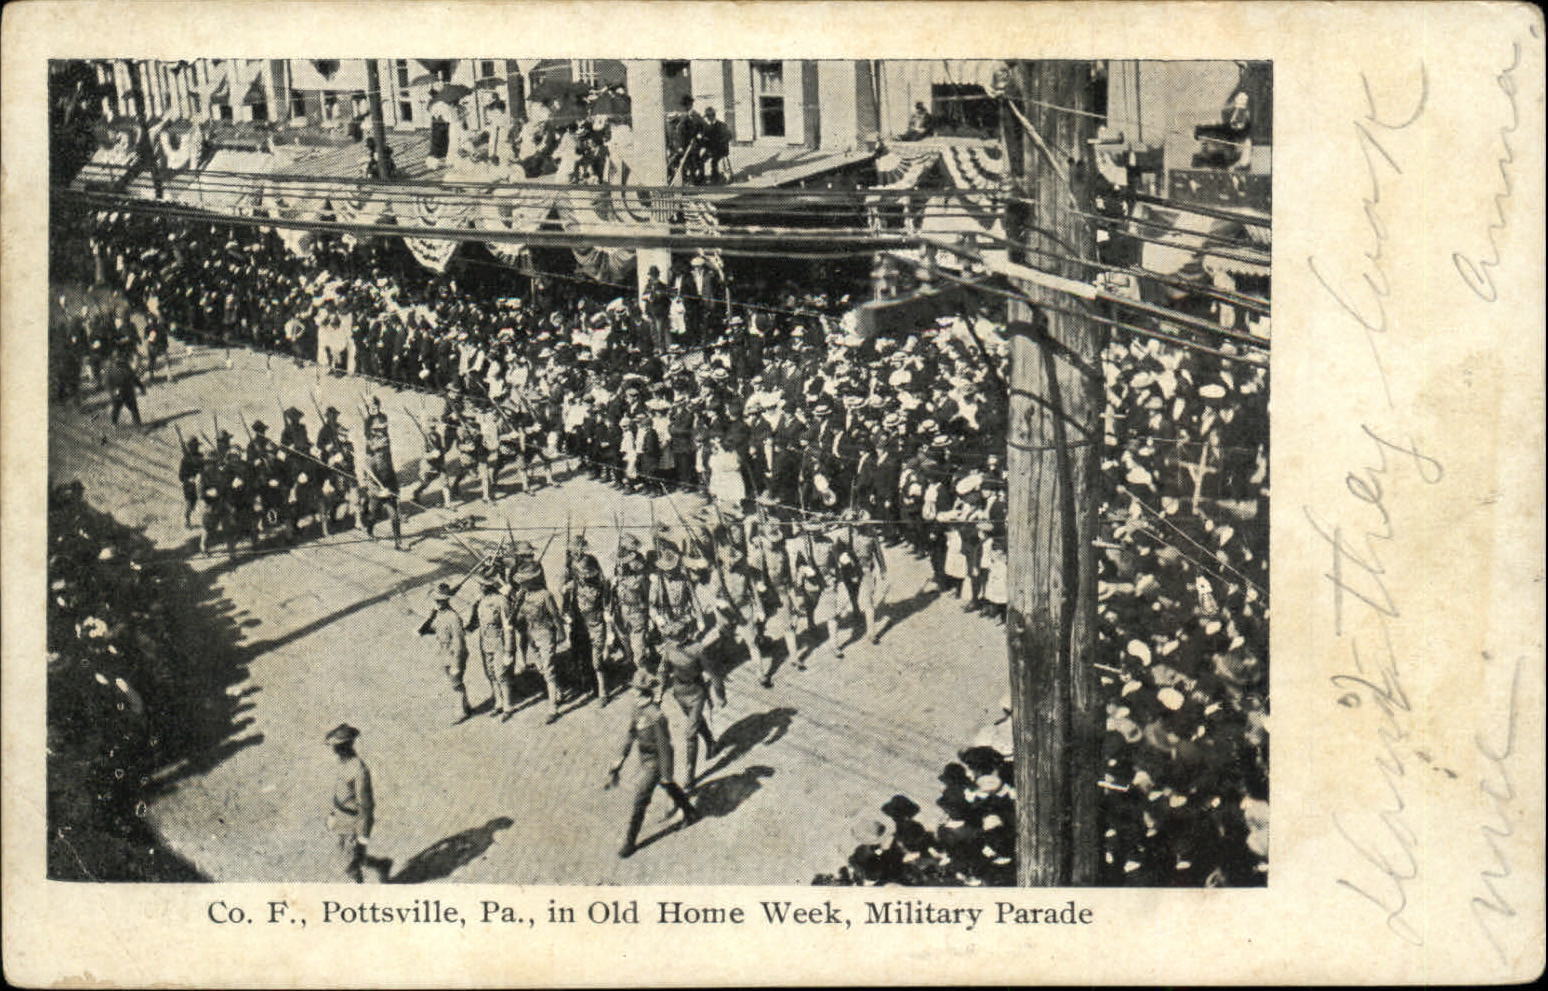 Pottsville PA Company F Military Parade Old Home Week vintage postcard